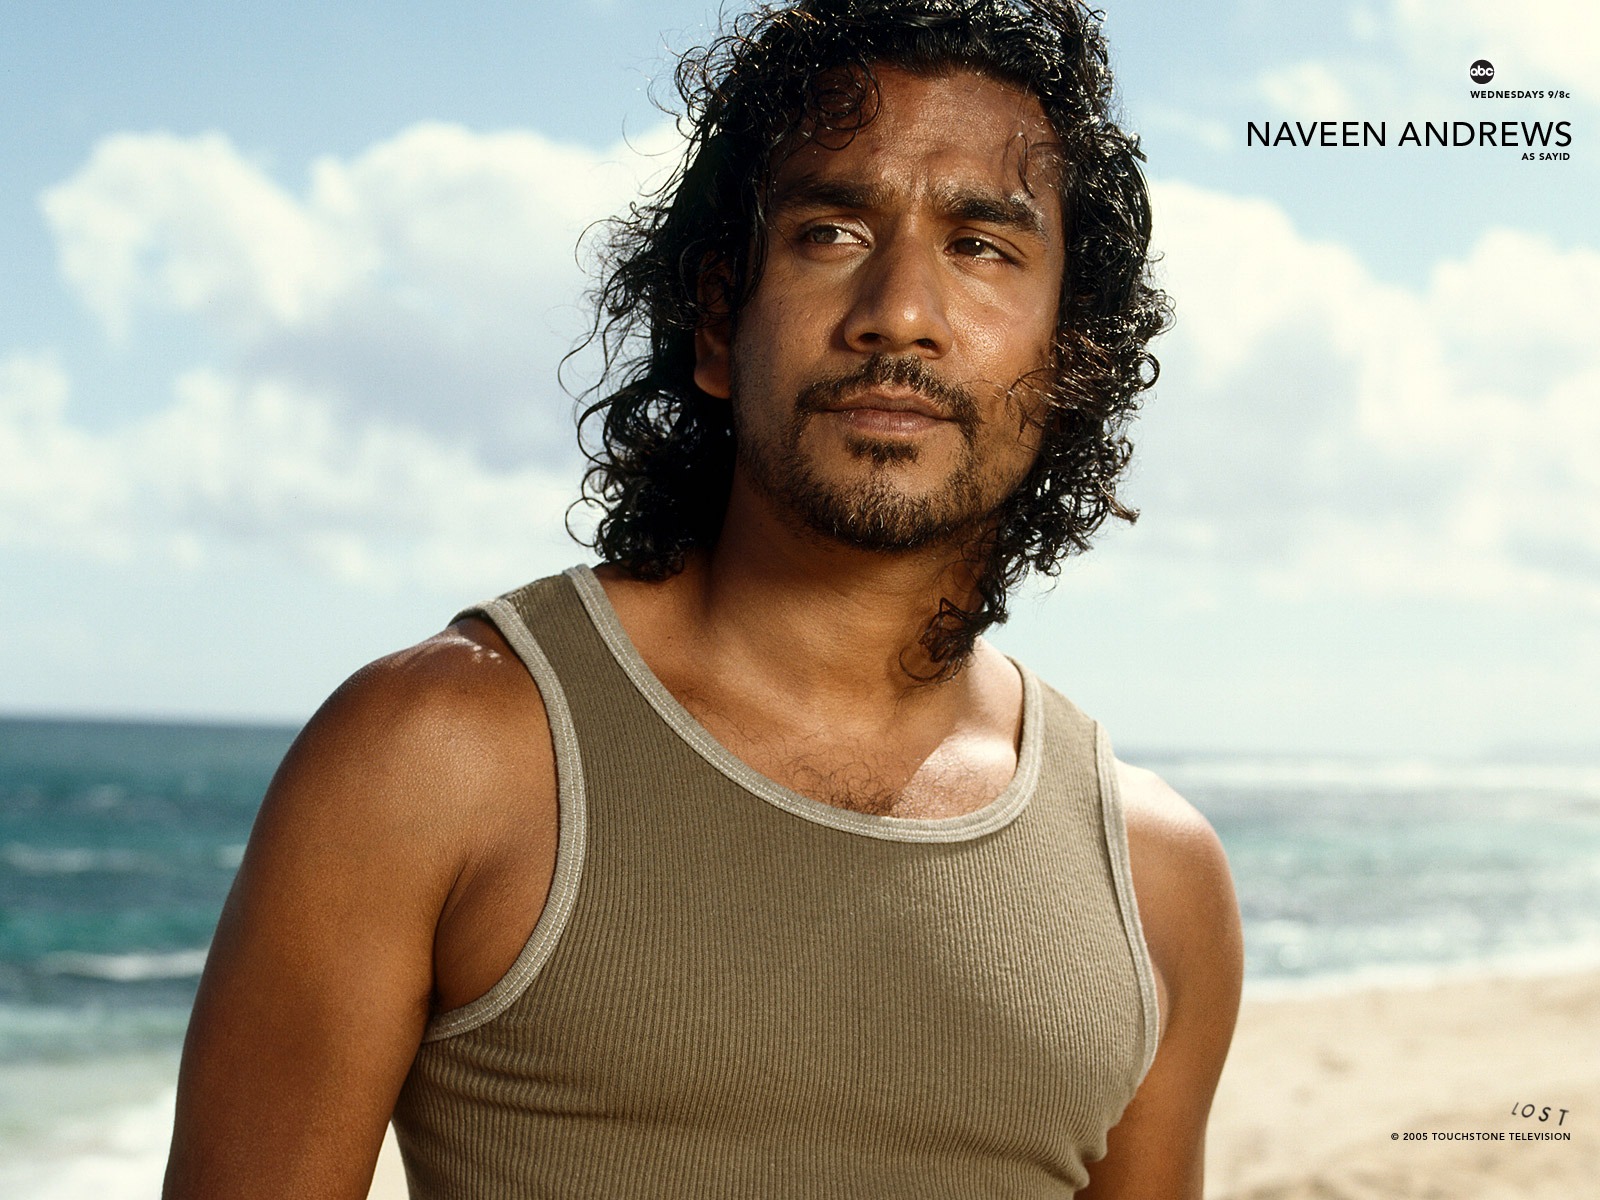 Image result for naveen andrews saeed